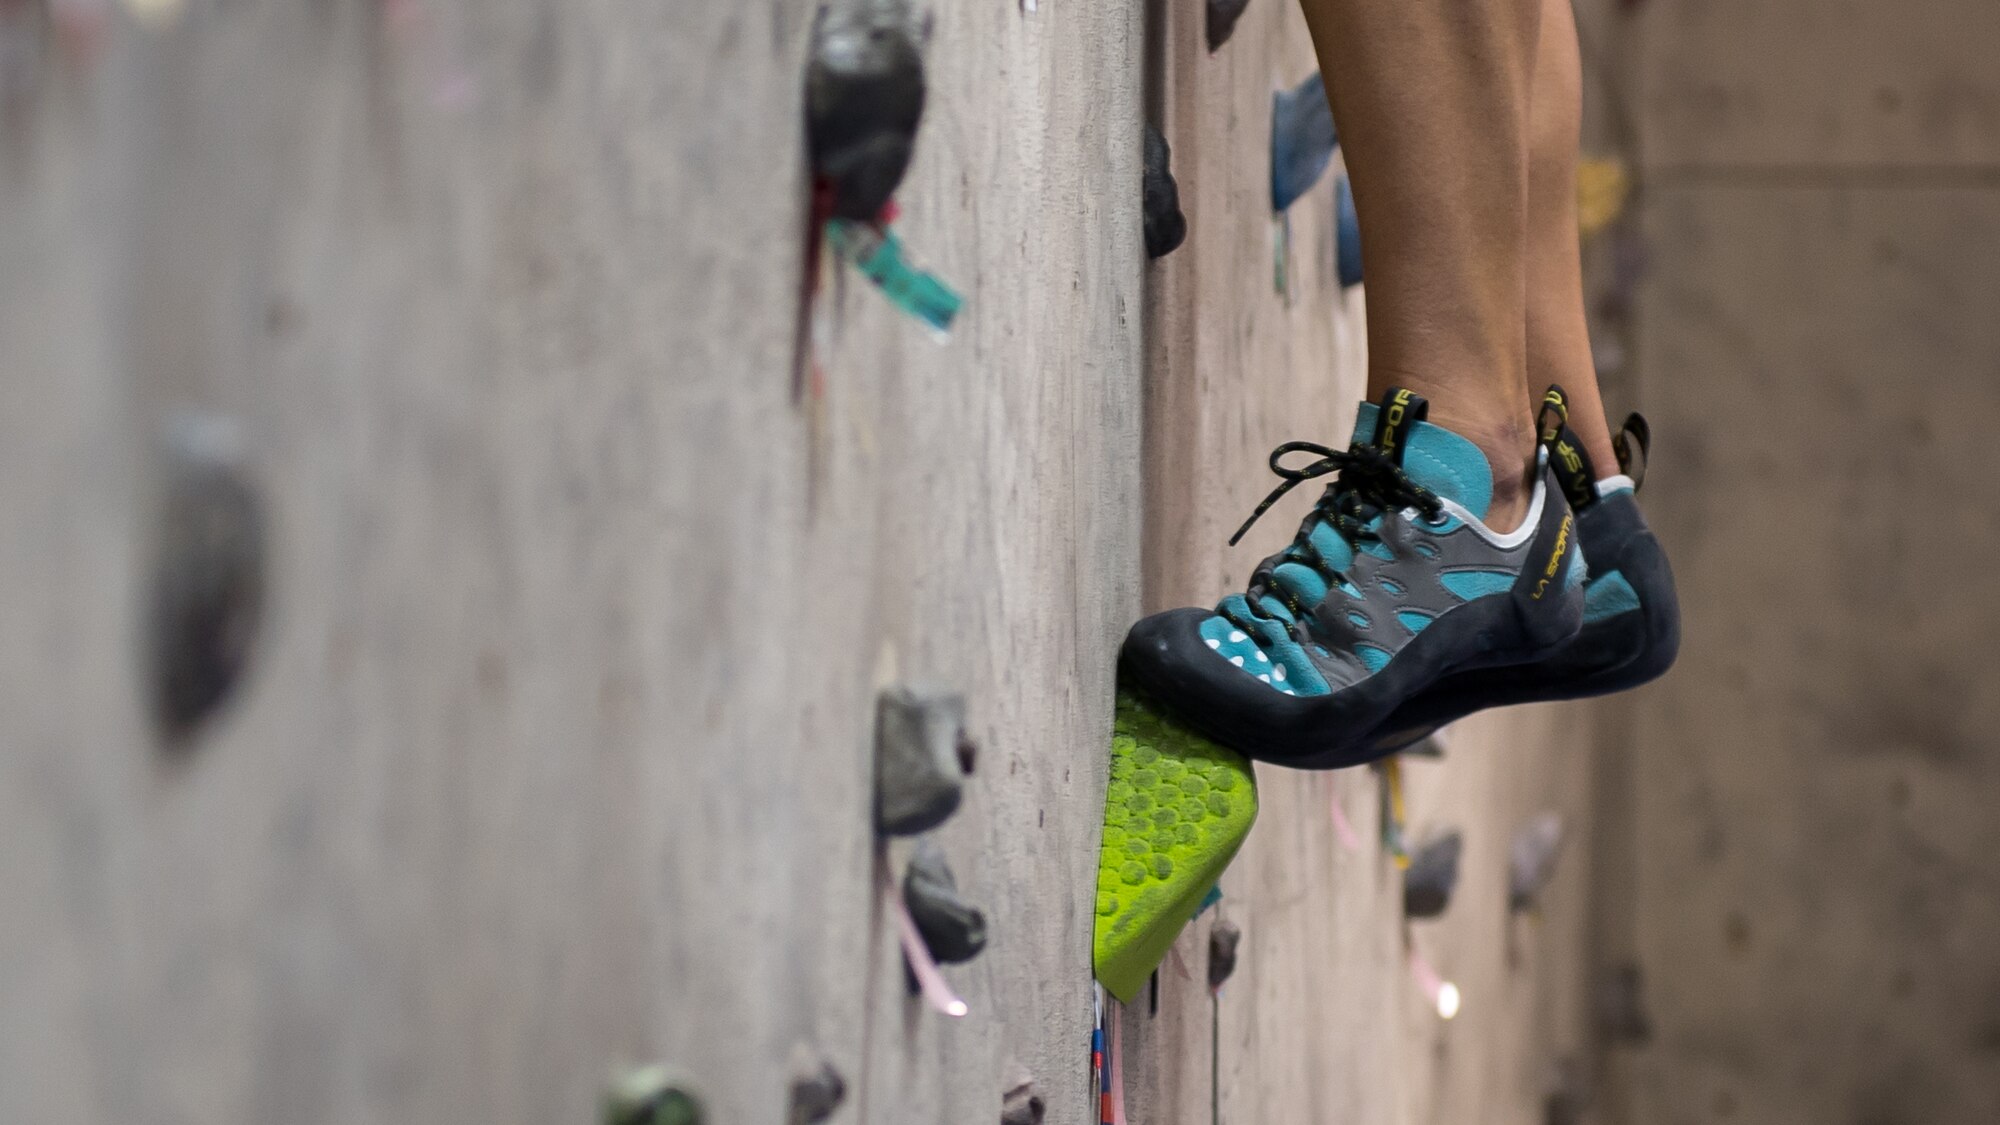 U.S. Air Force Maj. Breanna Gawrys, 386th Expeditionary Medical Group physician, steps onto a climbing hold on the bouldering wall near the Flex Gym on Ali Al Salem Air Base, Kuwait, June 30, 2019. Gawrys worked with a colleague to renovate the wall and provide an additional fitness option for ASAB personnel. (U.S. Air Force photo by Tech. Sgt. Daniel Martinez)